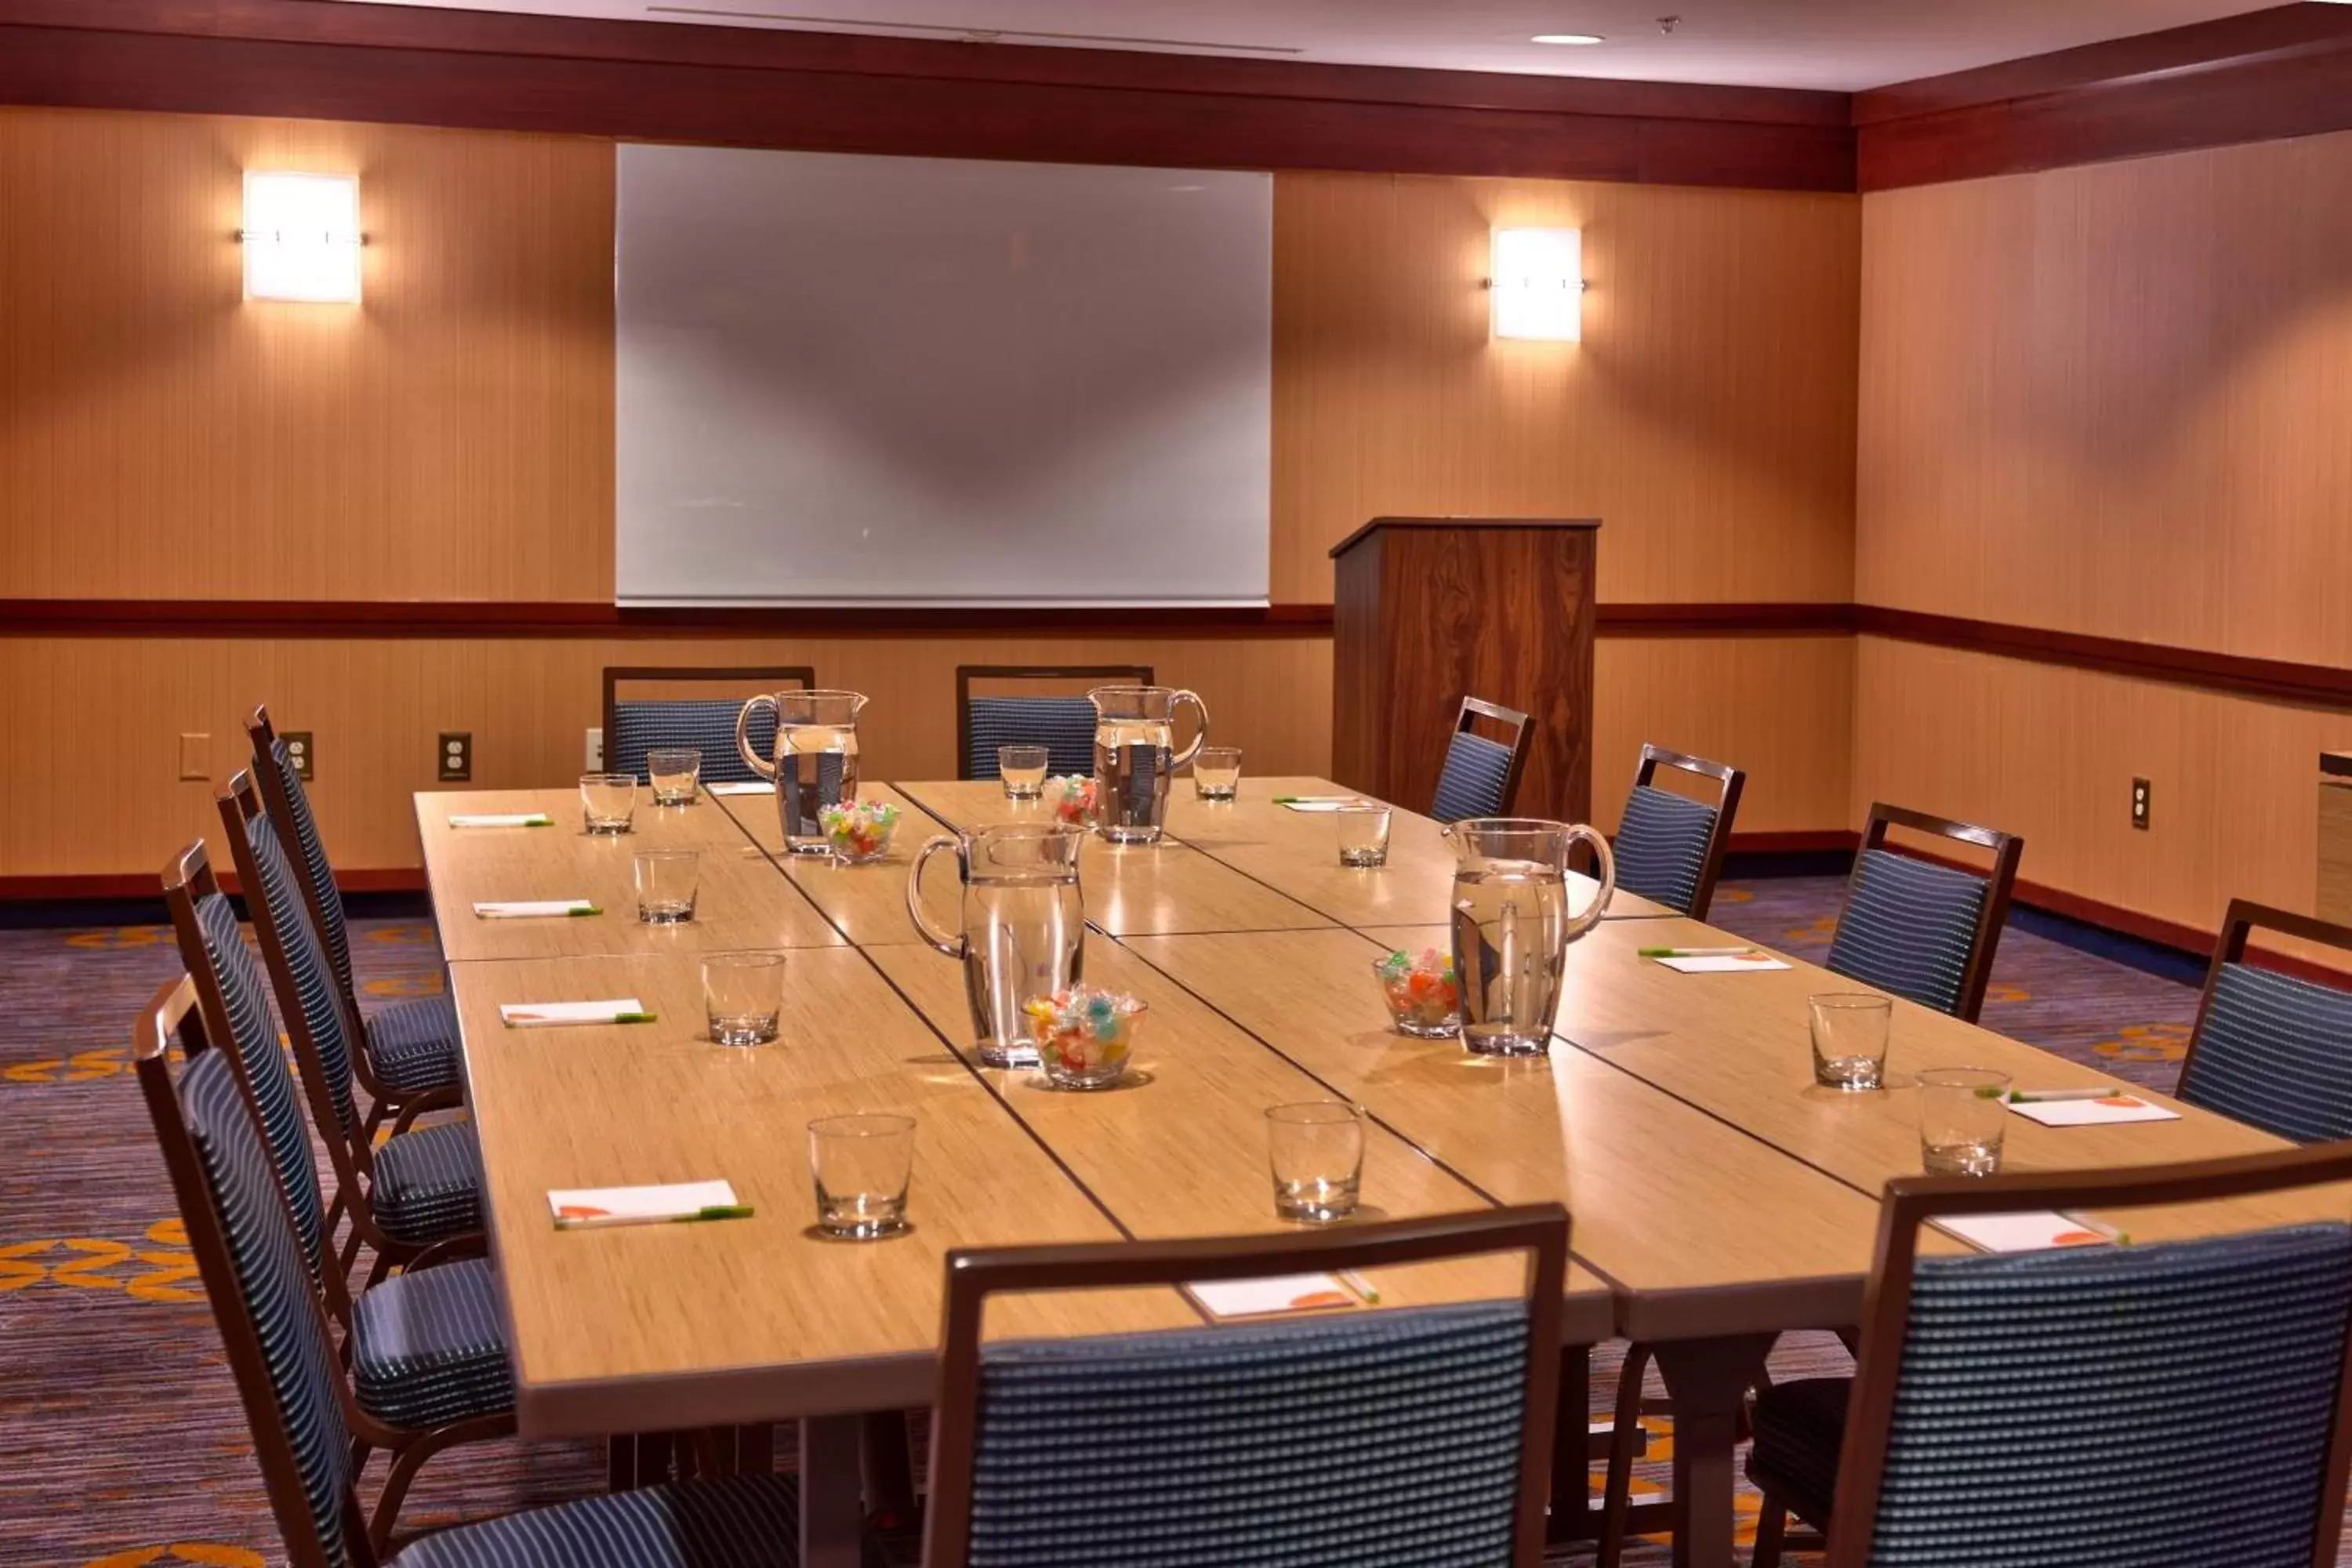 Meeting/conference room in Courtyard by Marriott Kansas City Shawnee